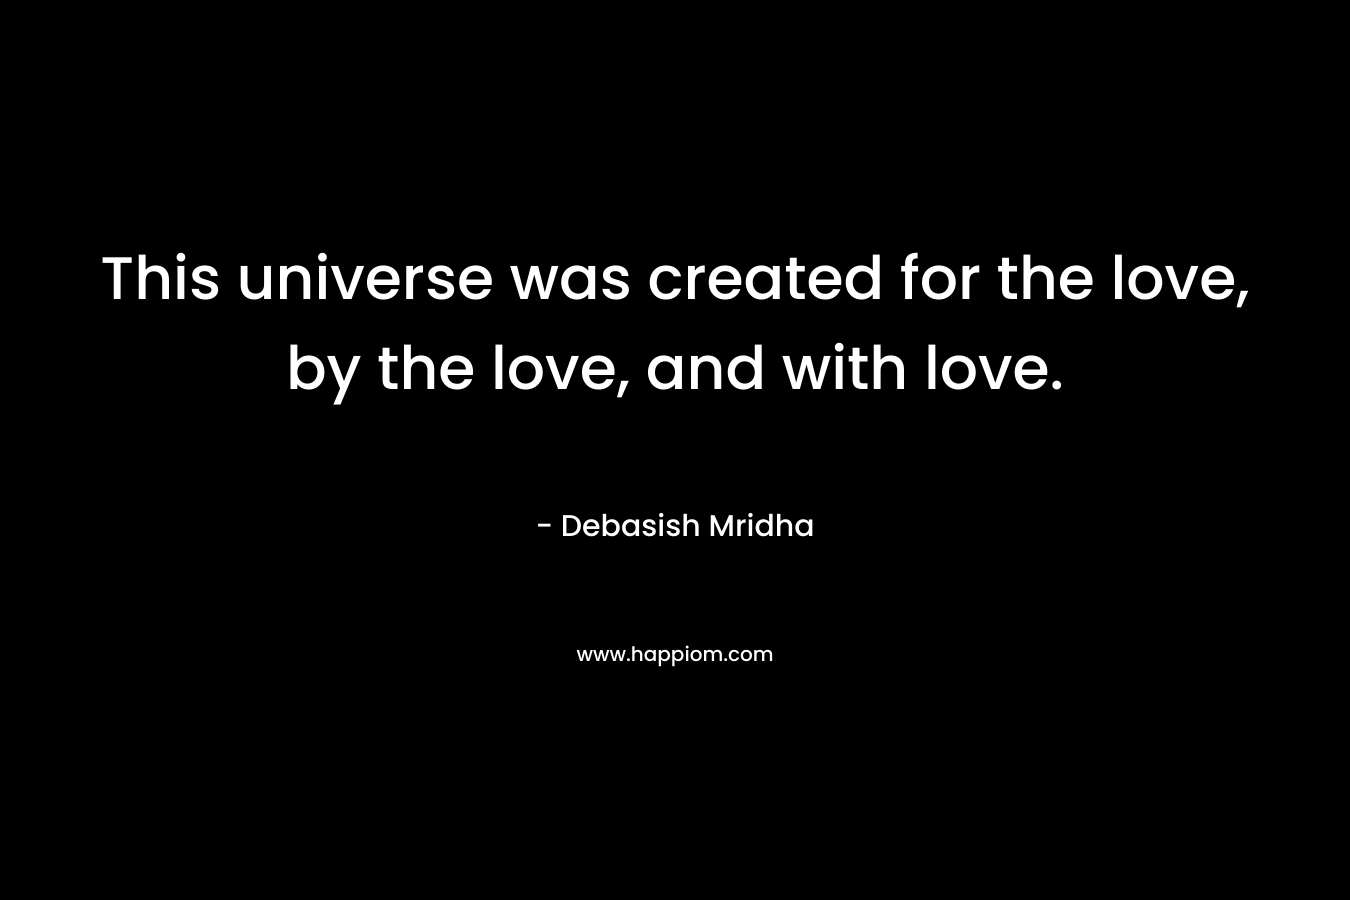 This universe was created for the love, by the love, and with love.